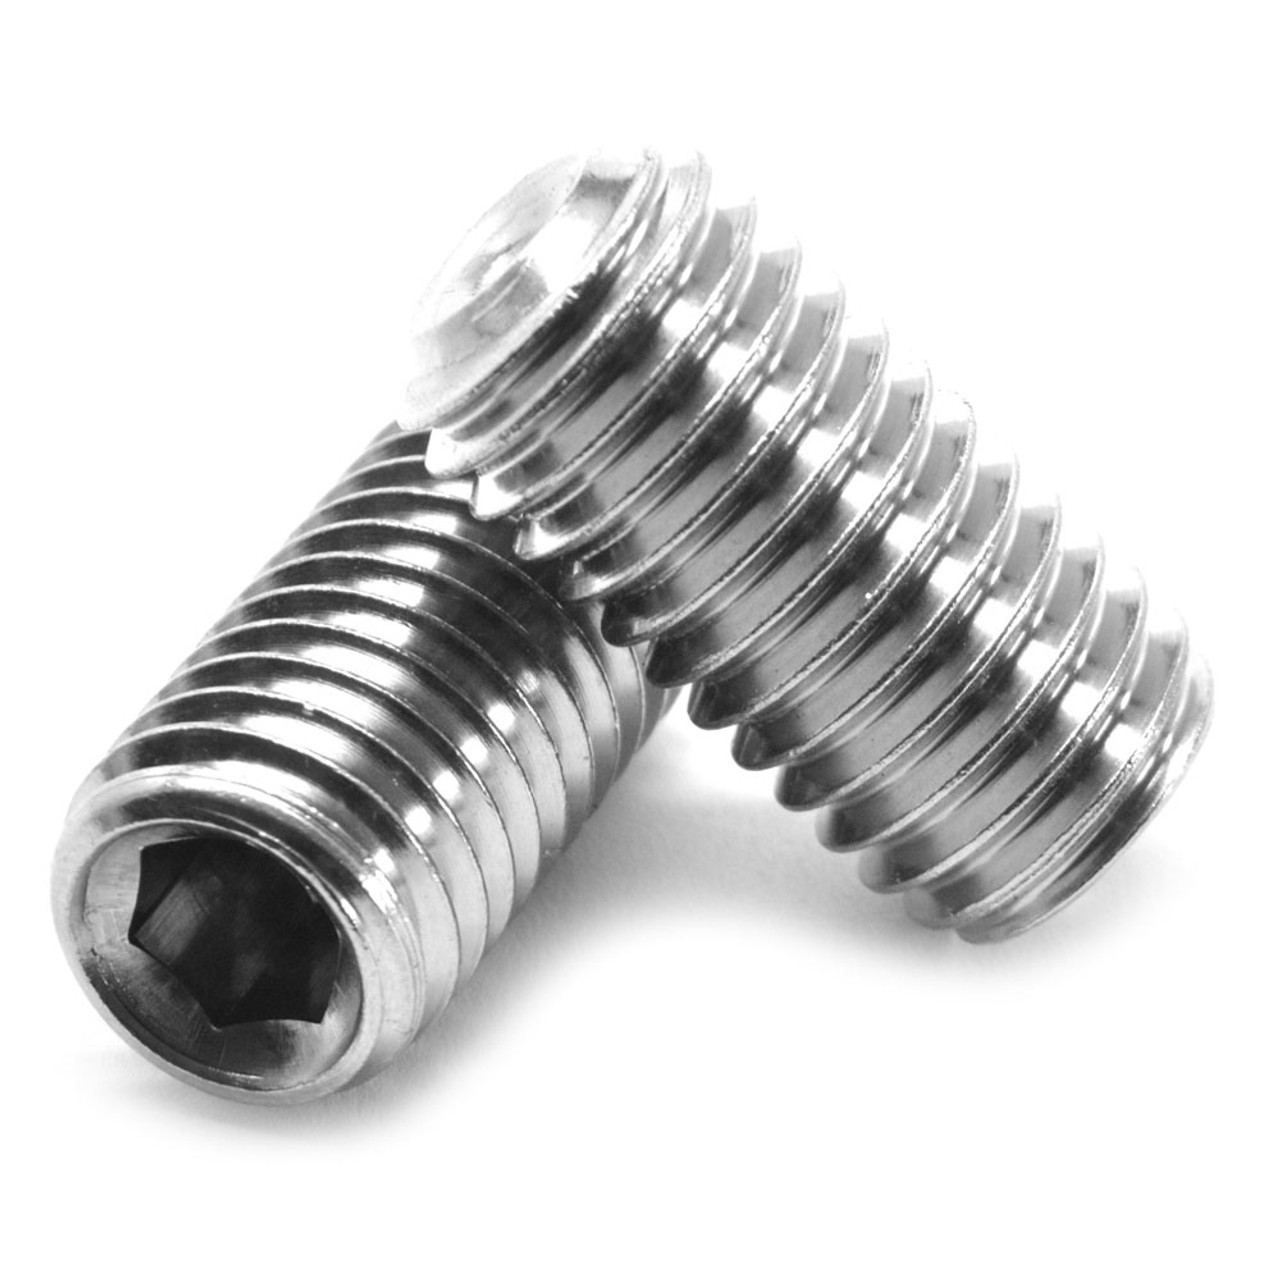 5/16"-18 x 1/2" Coarse Thread Socket Set Screw Cup Point Stainless Steel 316